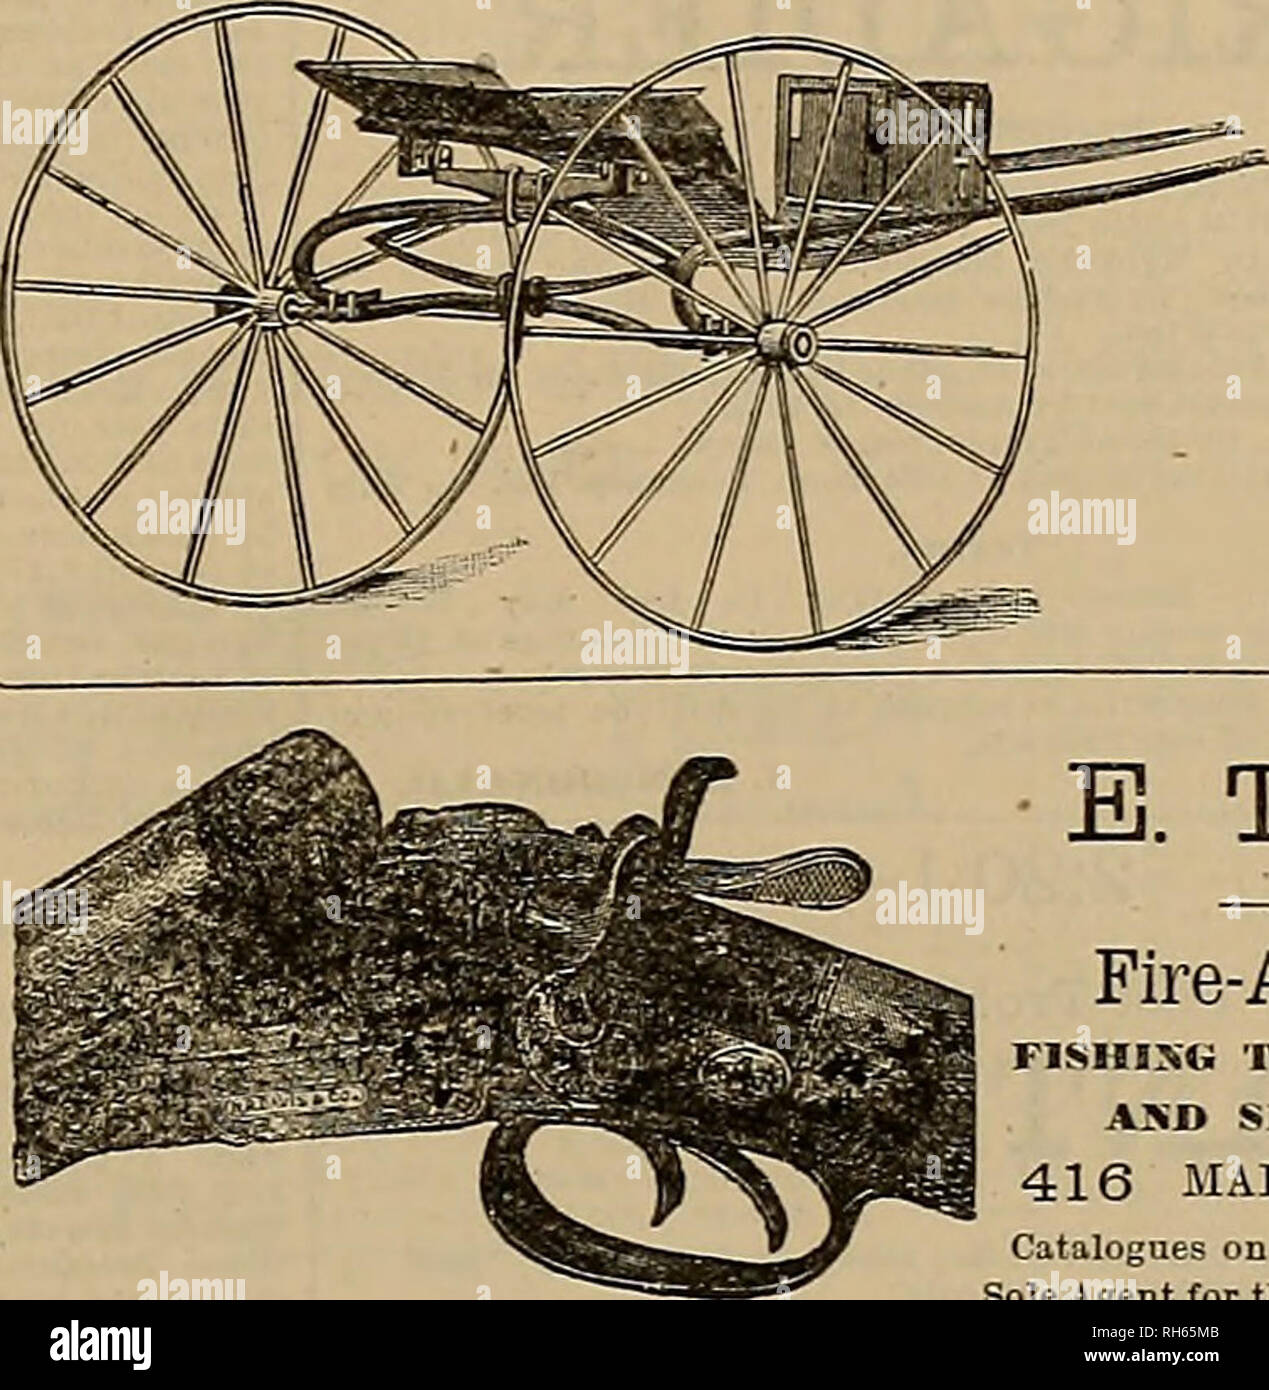 . Breeder and sportsman. Horses. THE CHAMPION One-Spring&quot; Training- Cart. ENTRIES. ENTRIES. Saturday, June 4th, 1884. En- 2-22 Class Purse S760, divided 8450, S200 and ?100. Mile beats. 3 in 5 in harness; 5 or more to enter; 3 or more to start. Entrance ten per cent, of purse, tries close with the Secretary Saturday, Jnne 71 T. W. HINCHMAN. 1438 California St â SUPERINTENDENT. Situation -wanted by nn Englishman, thor- o-ghly competent, as superintendent of a stock ranch or breeding establishment. Un- derstand the business. Highest references eiven. Address, J. M., this Office. FOR SALE. H Stock Photo